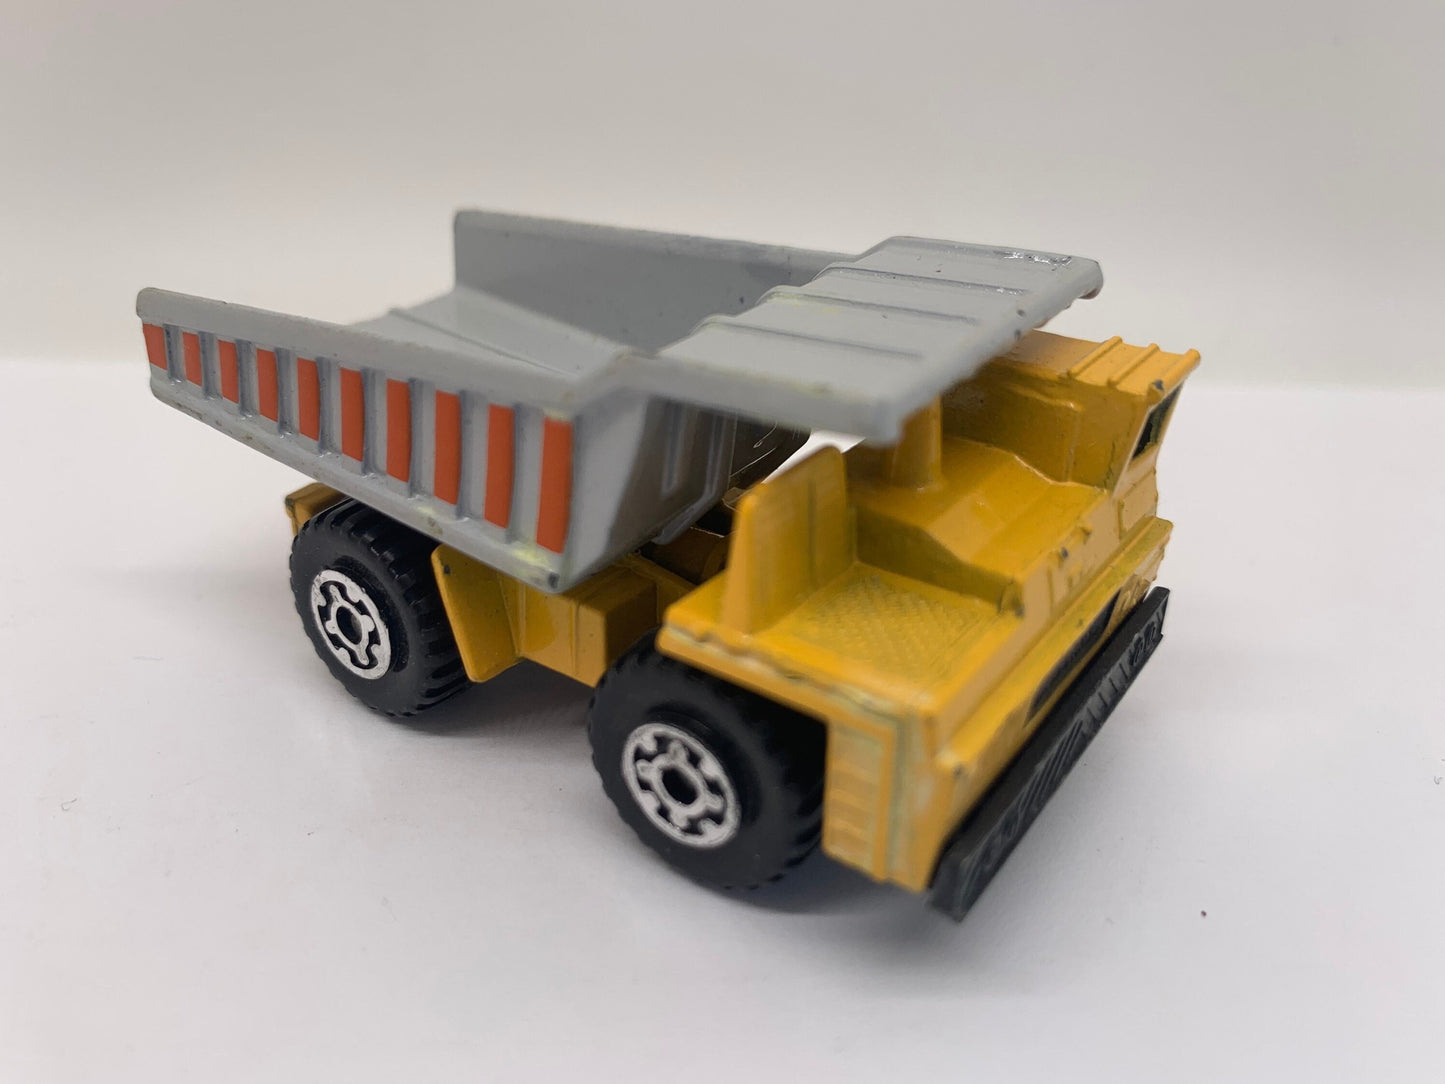 Matchbox Faun Quarry Dump Truck Turf Hauler Yellow Collectable Miniature Scale Model Toy Car Perfect Birthday Gift